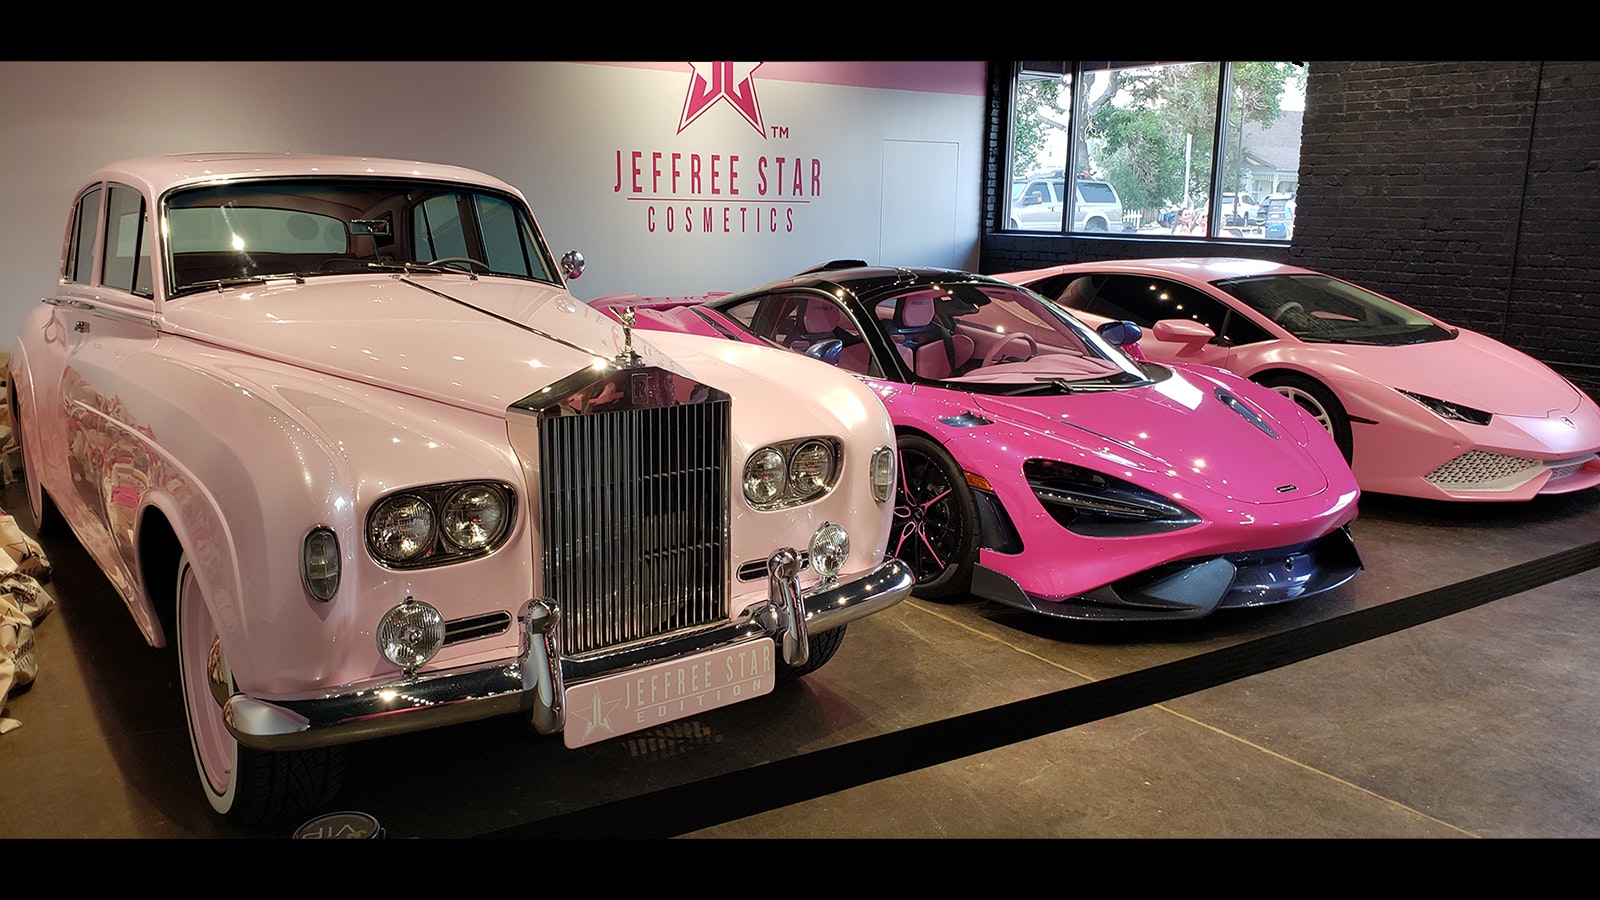 A few of Jeffree Star's pink vehicles on display.